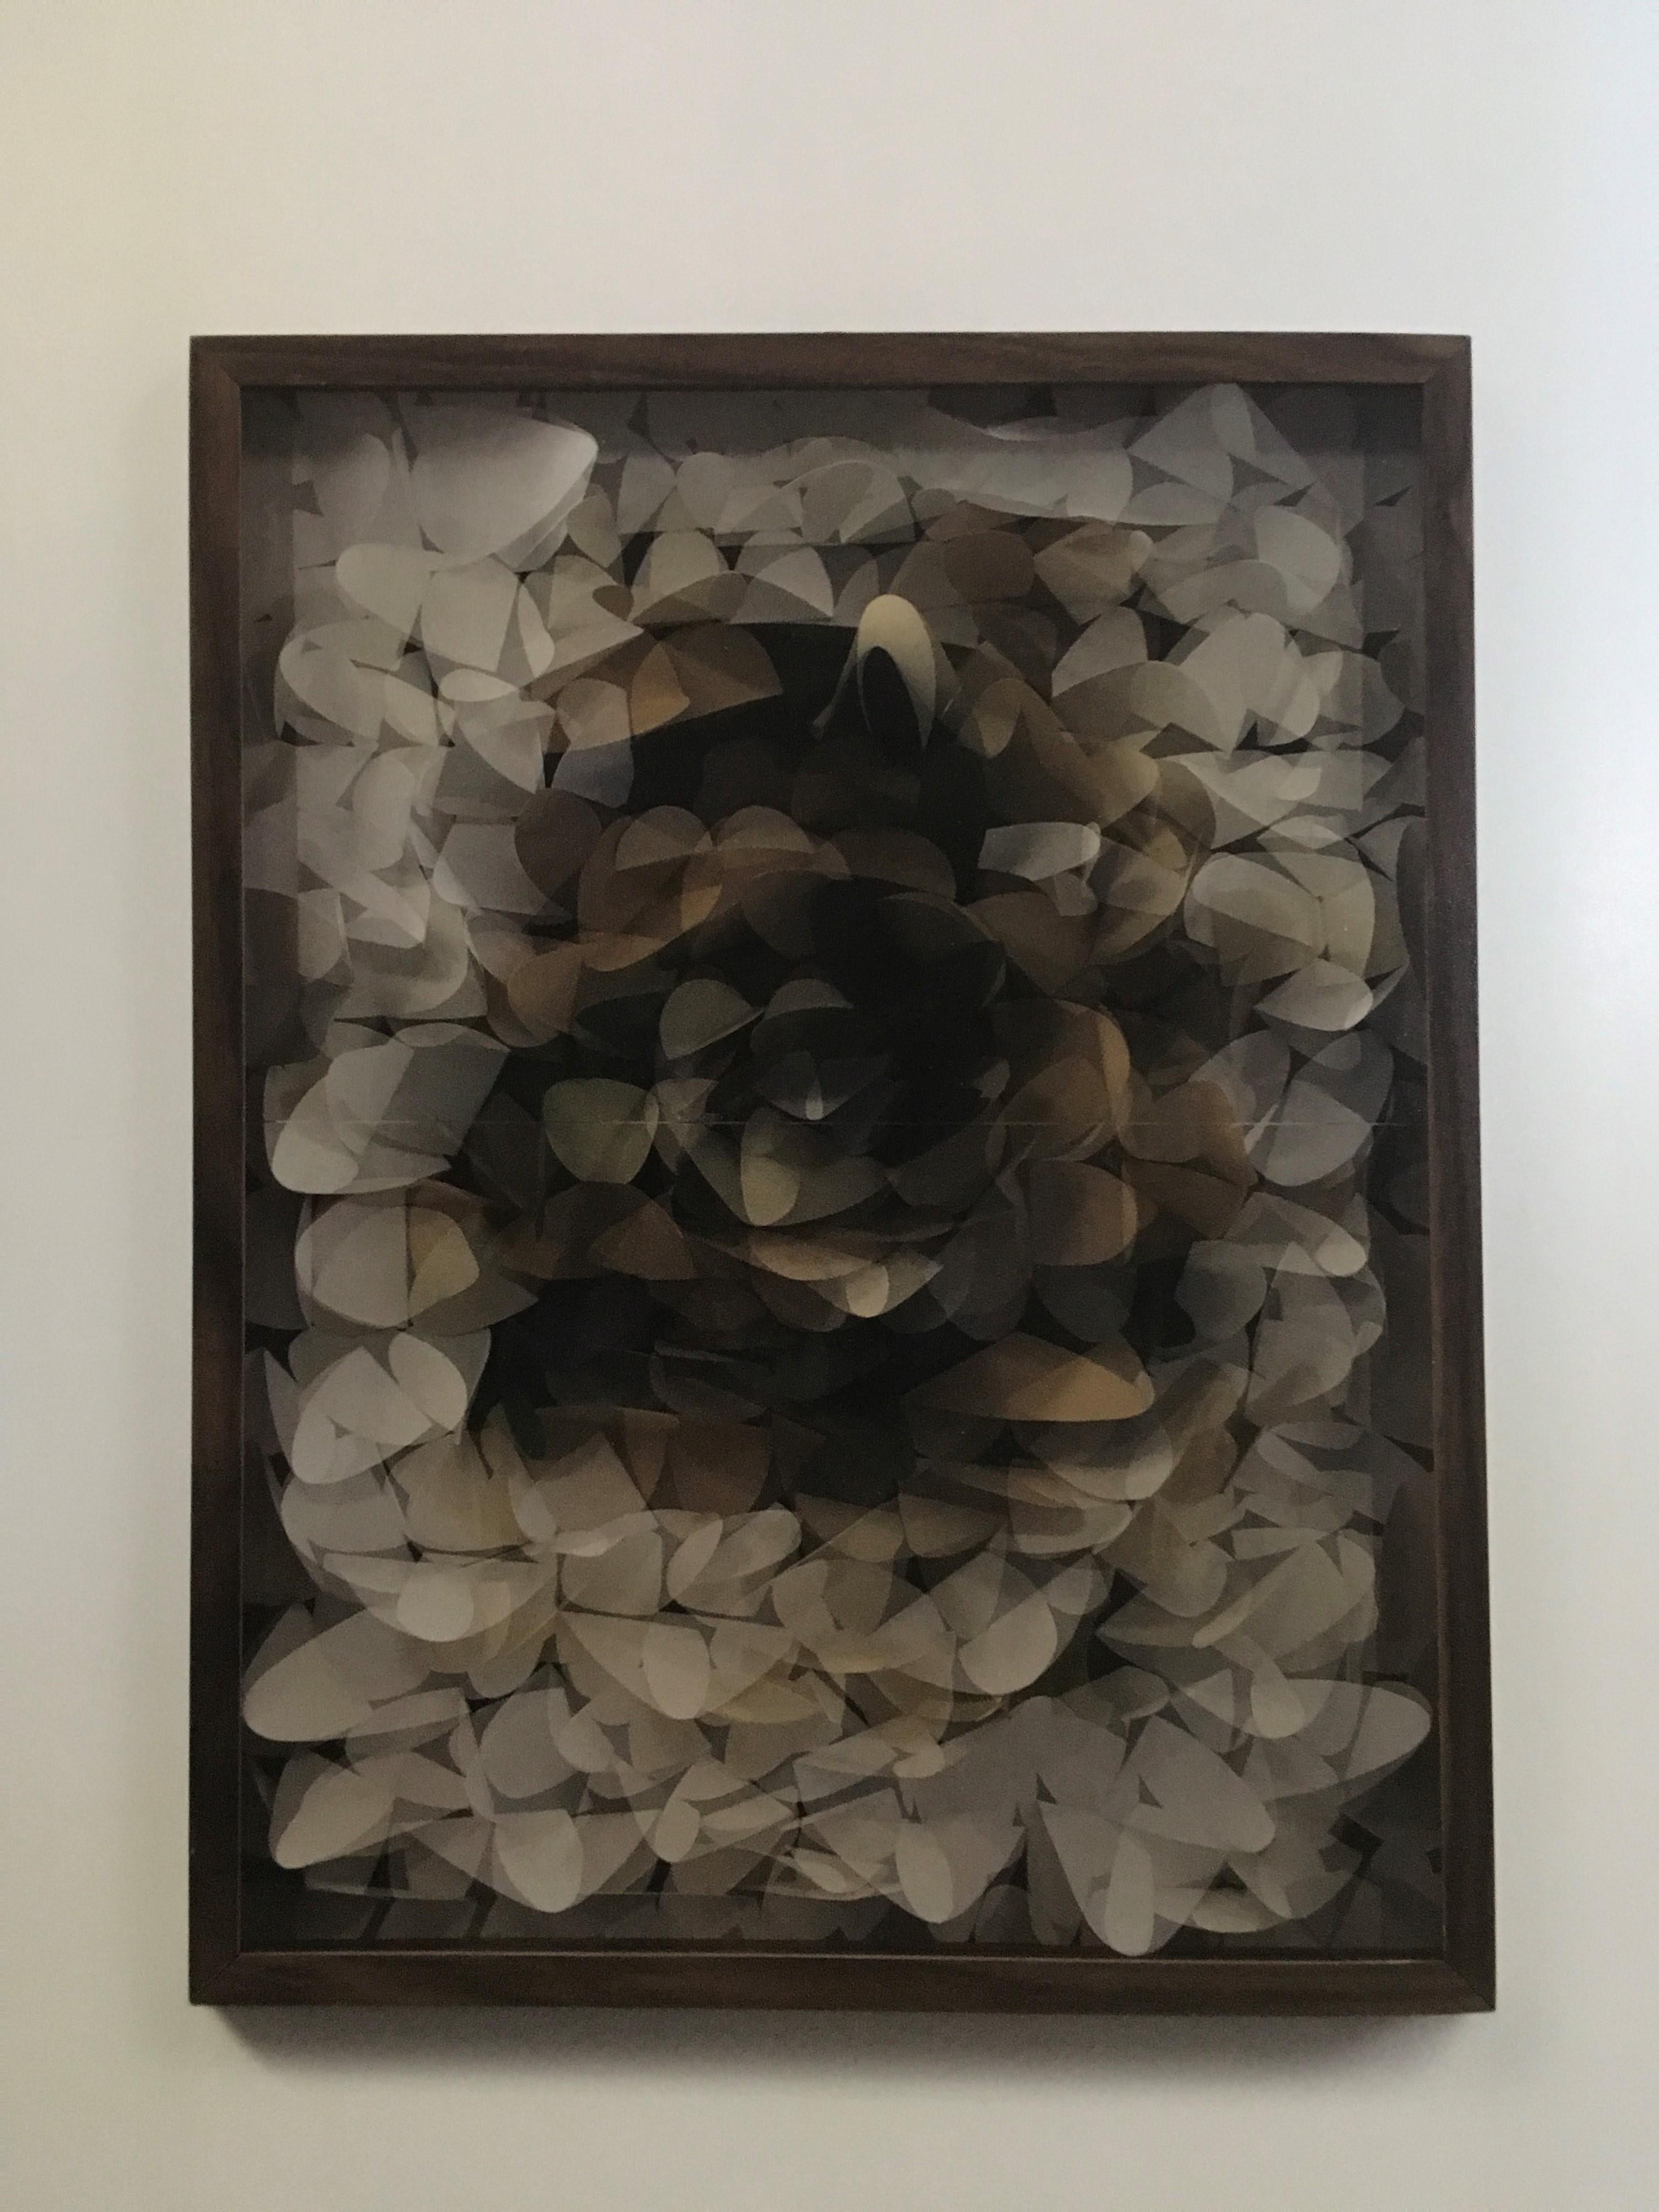 Italy Mixed Media Abstract Paper Flower Assemblage Under Lenticular Lens - Painting by Maurizio Donzelli